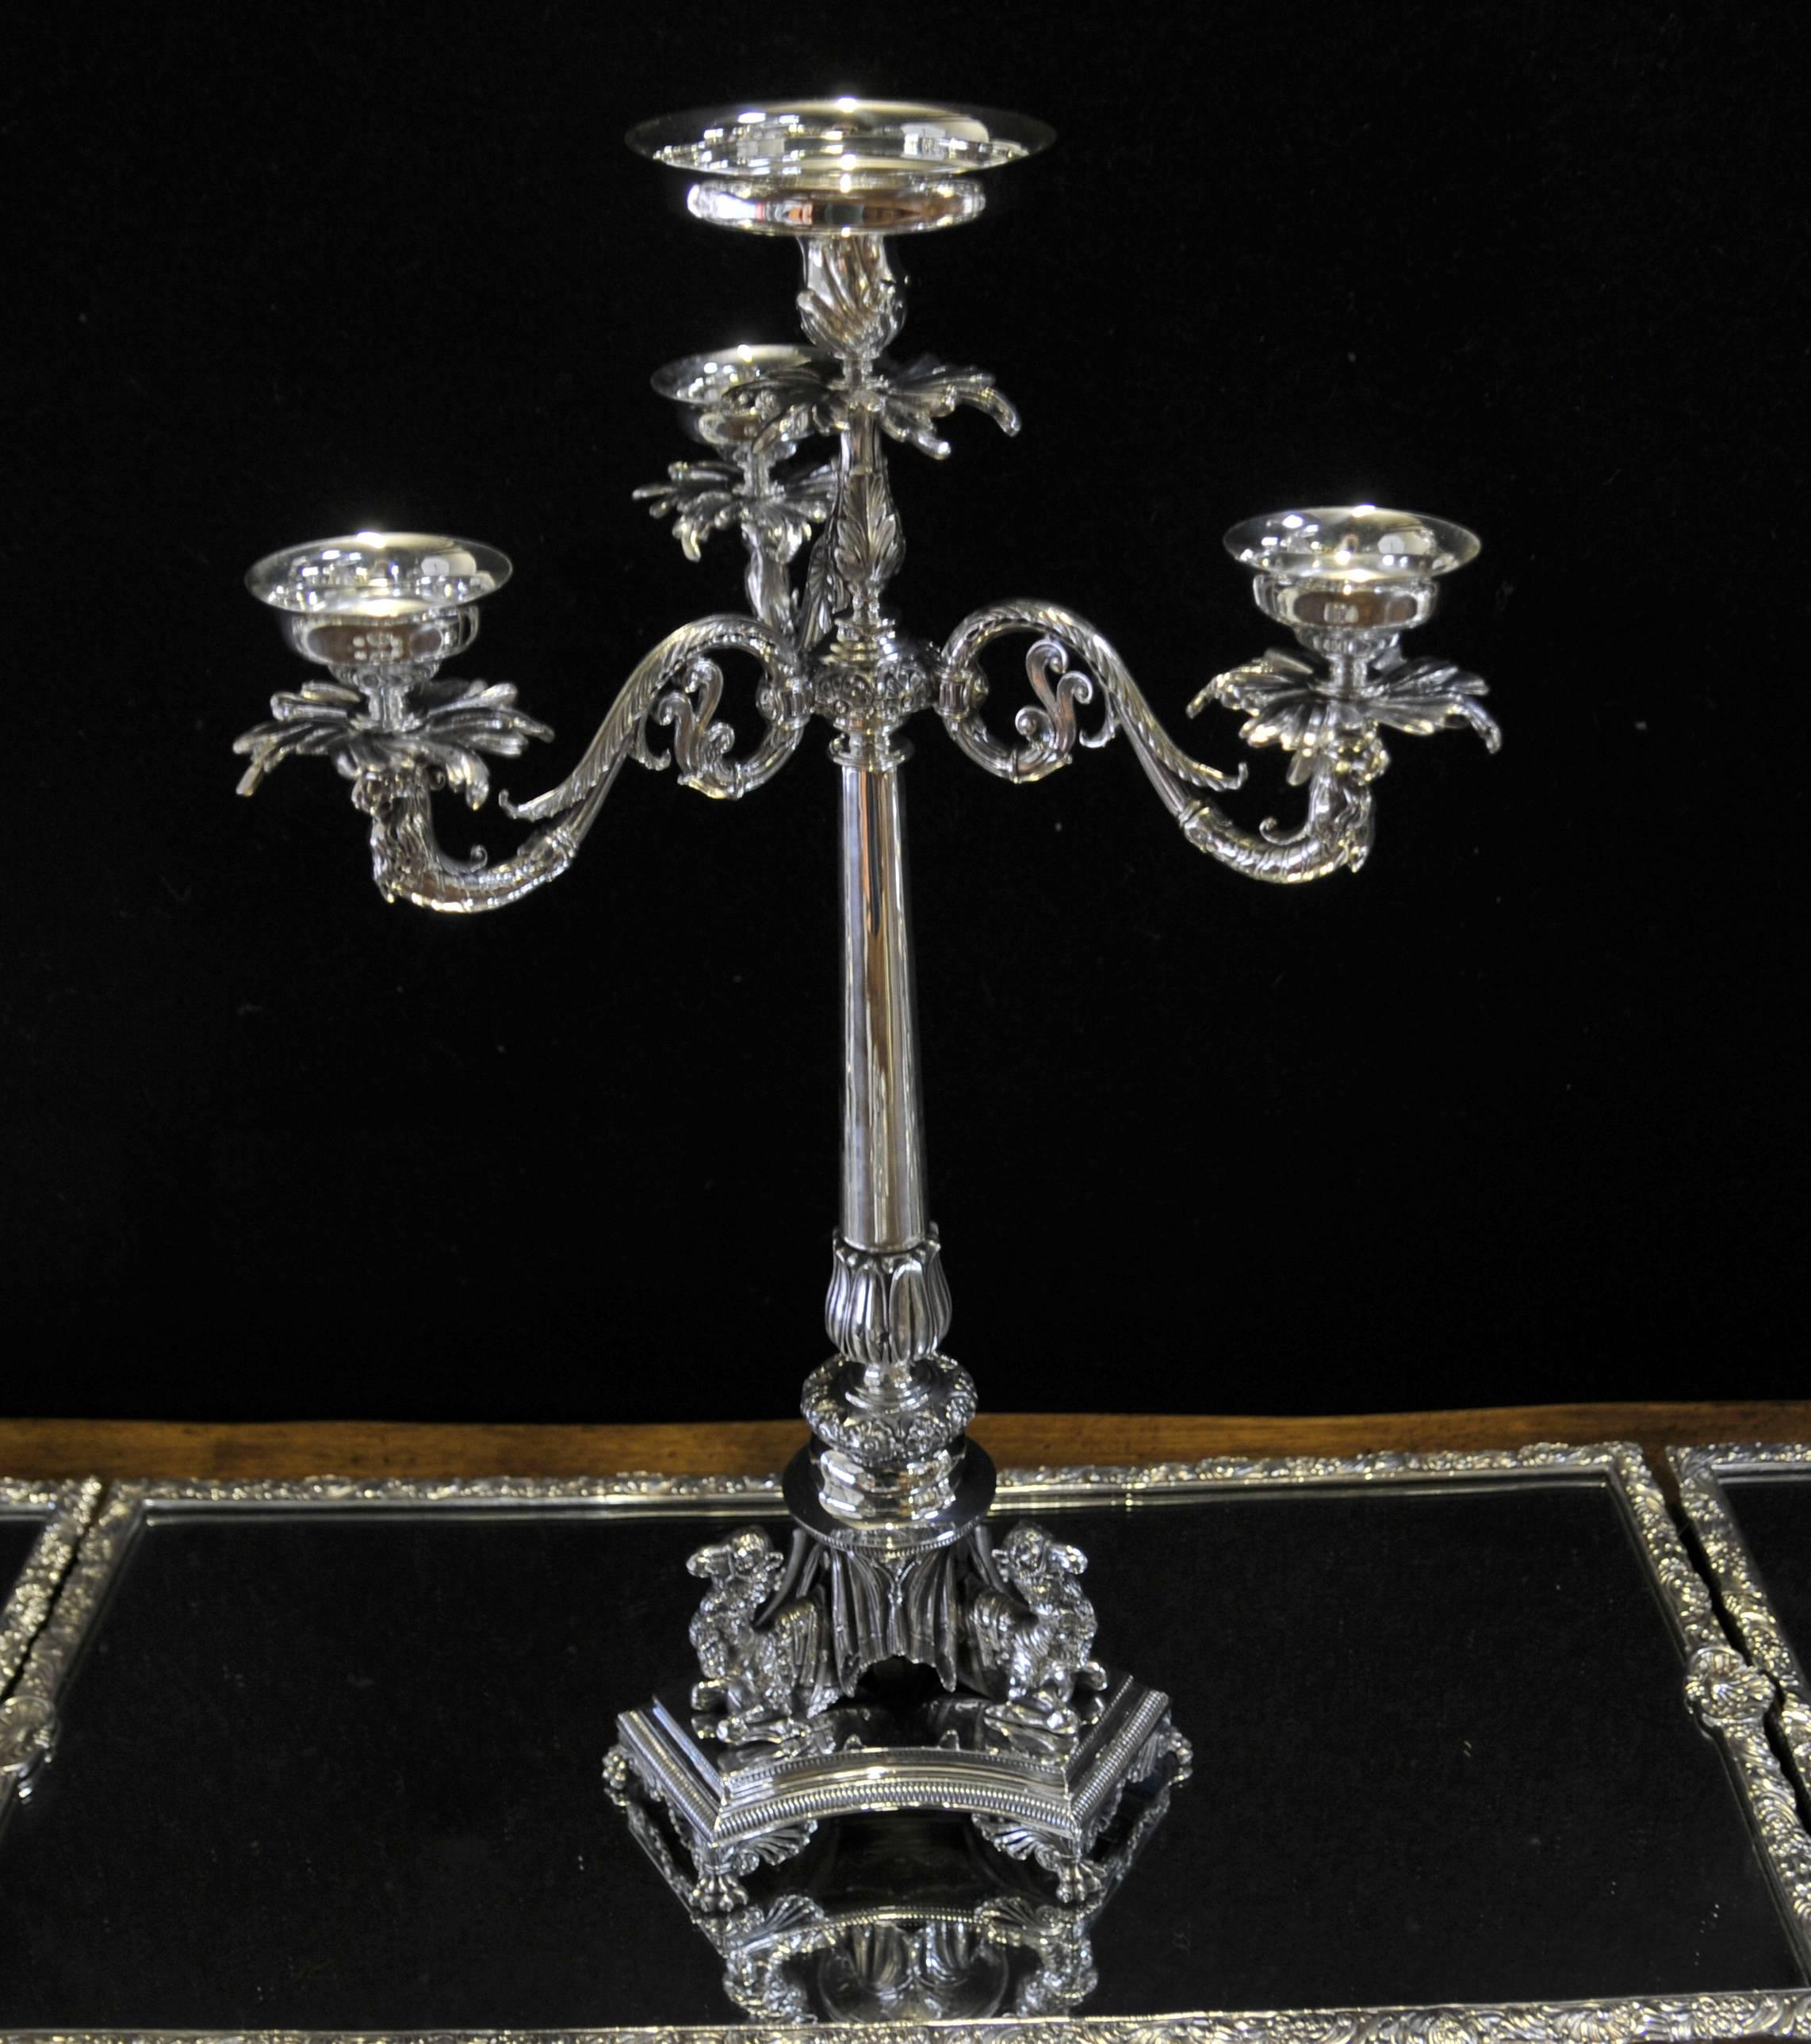  Large Victorian Silver Plate Centerpiece Epergne Cut Glass Vase 4